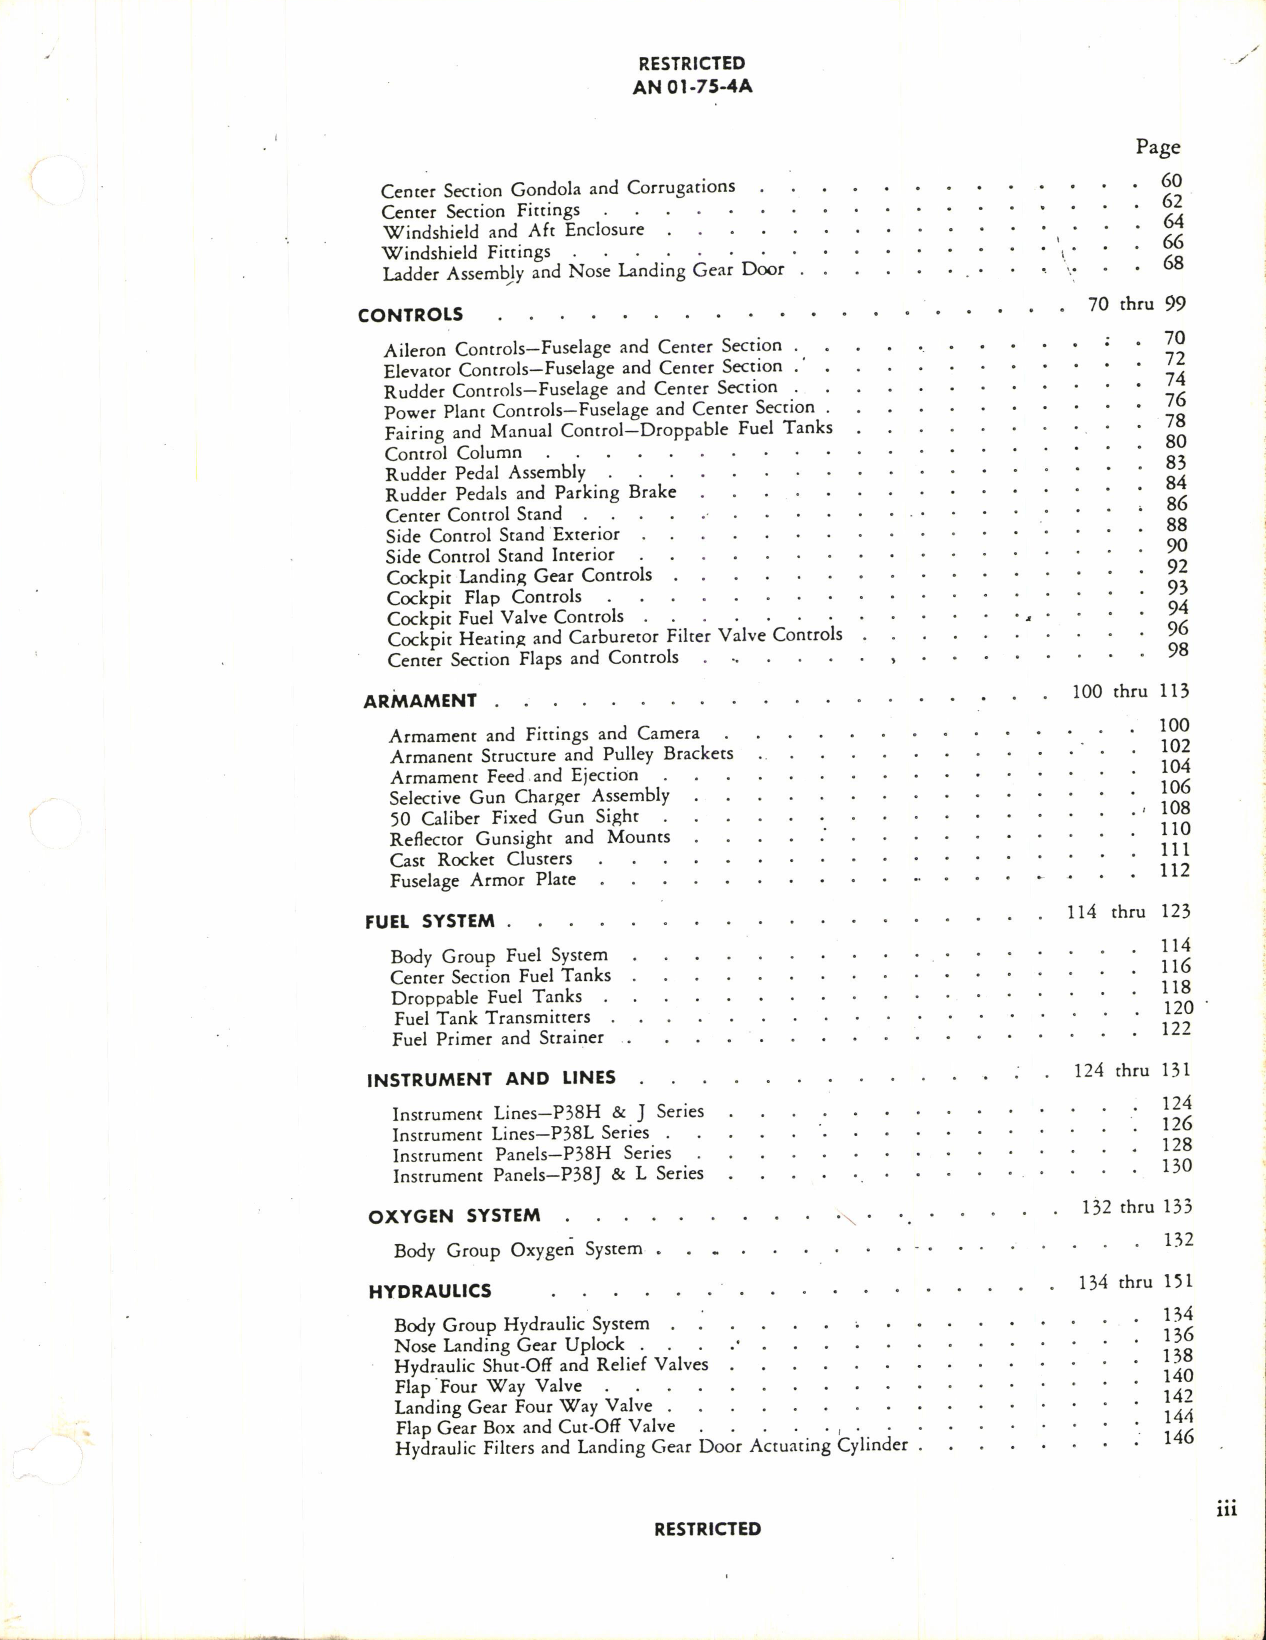 Sample page 8 from AirCorps Library document: Parts Catalog for P-38H, P-38J, P-38L, and F-5B Airplanes